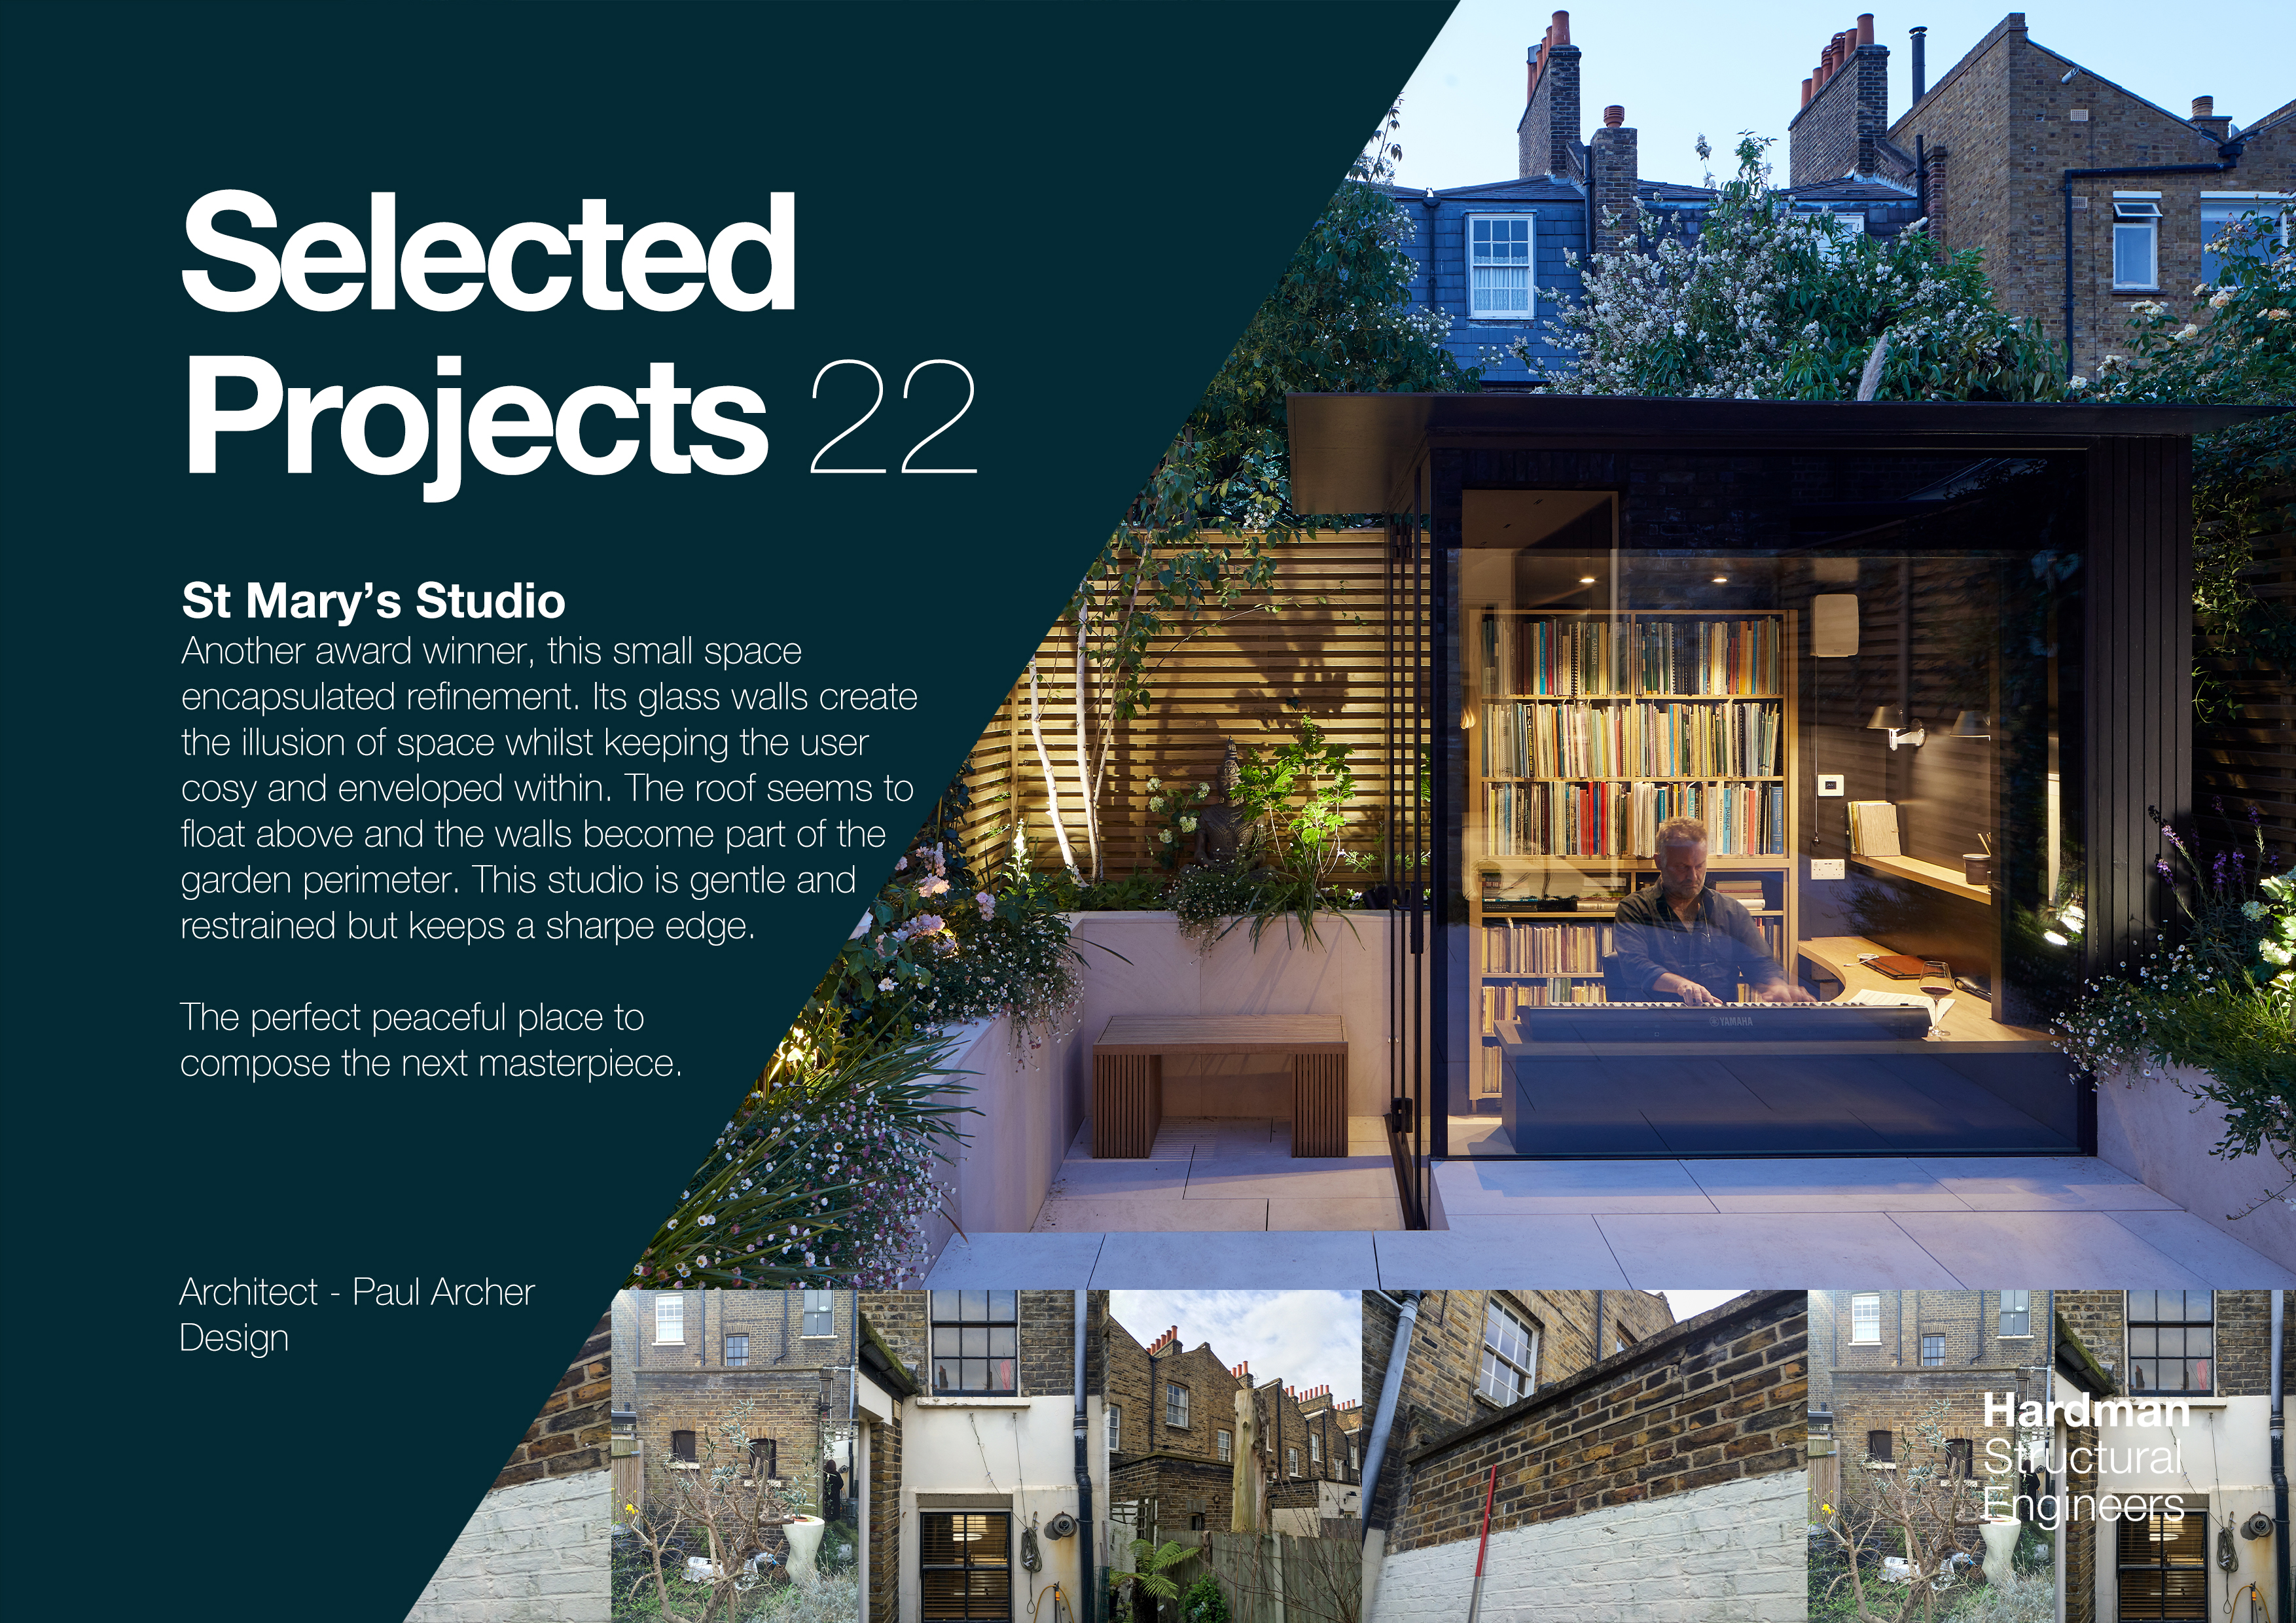 Selected Projects - St Marys Studio